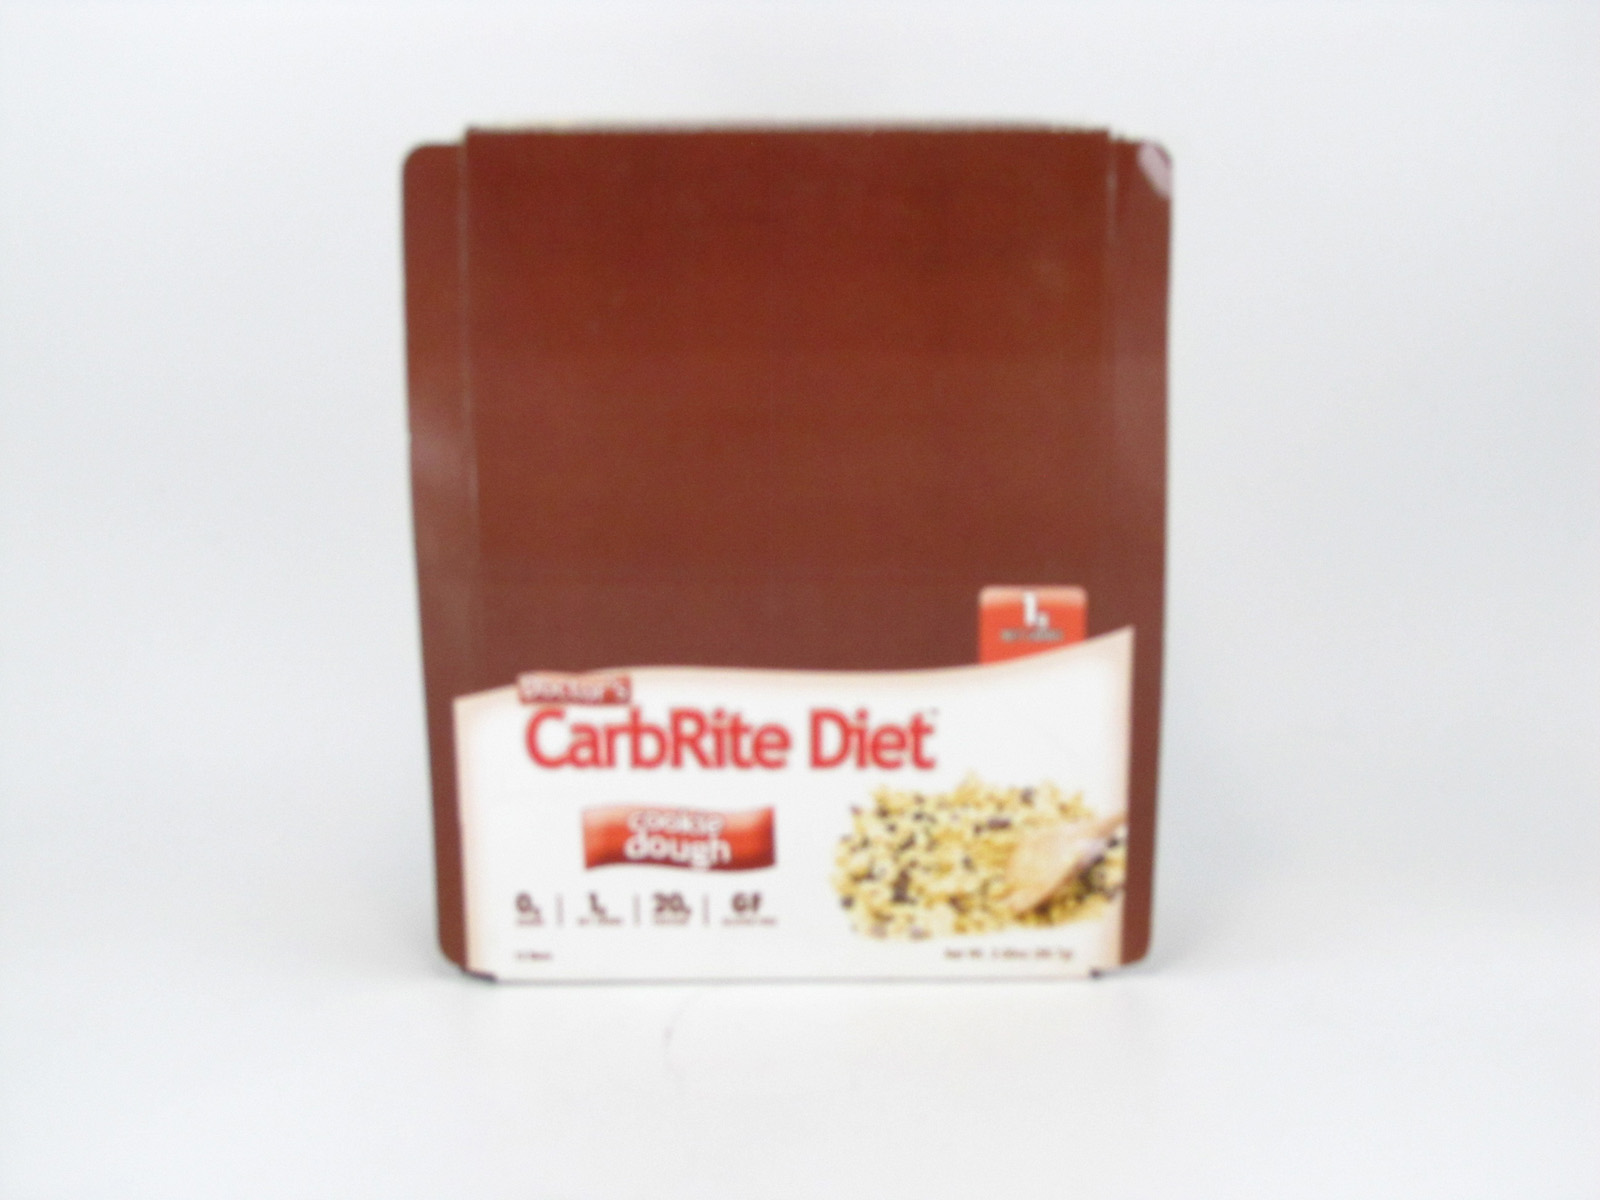 Doctor's CarbRite Diet - Chocolate Cookie Dough - Box view